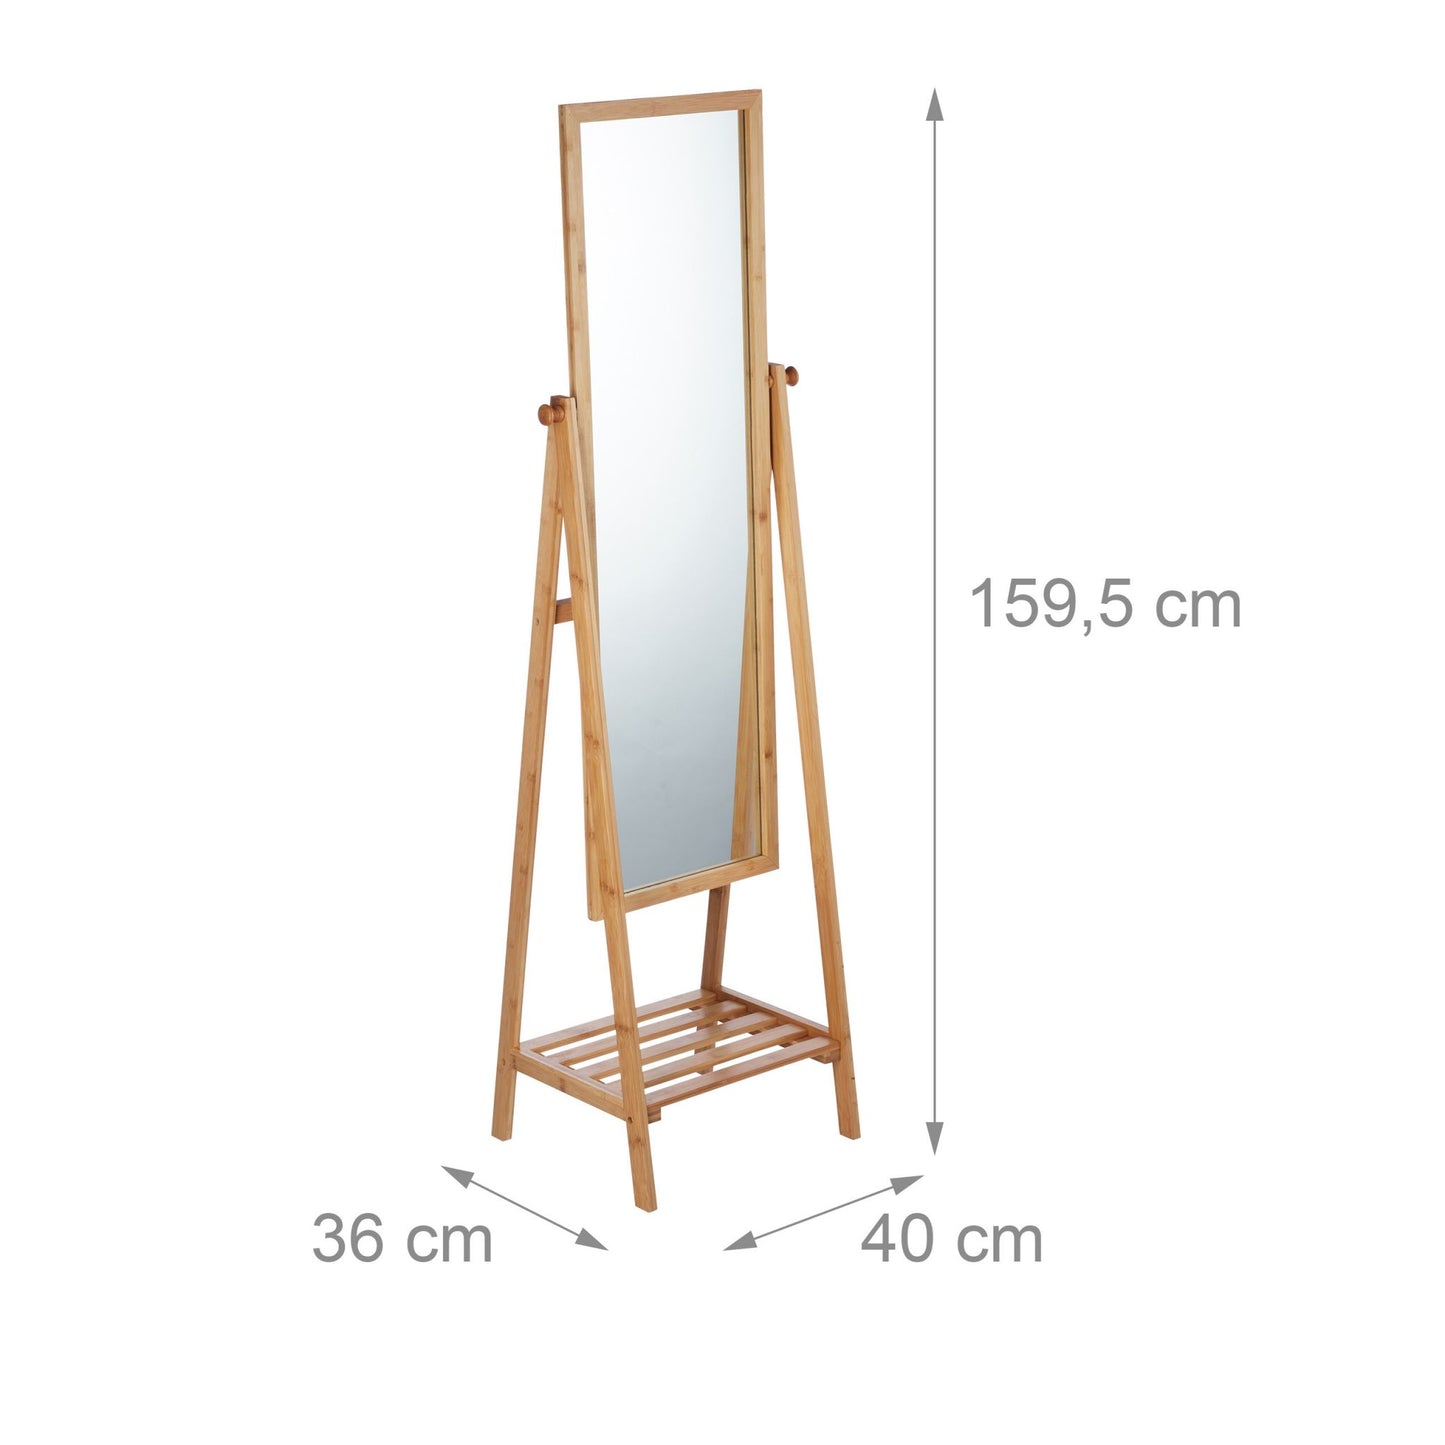 RelaxDays Free-Standing Bamboo Mirror Bamboo Bathrooms